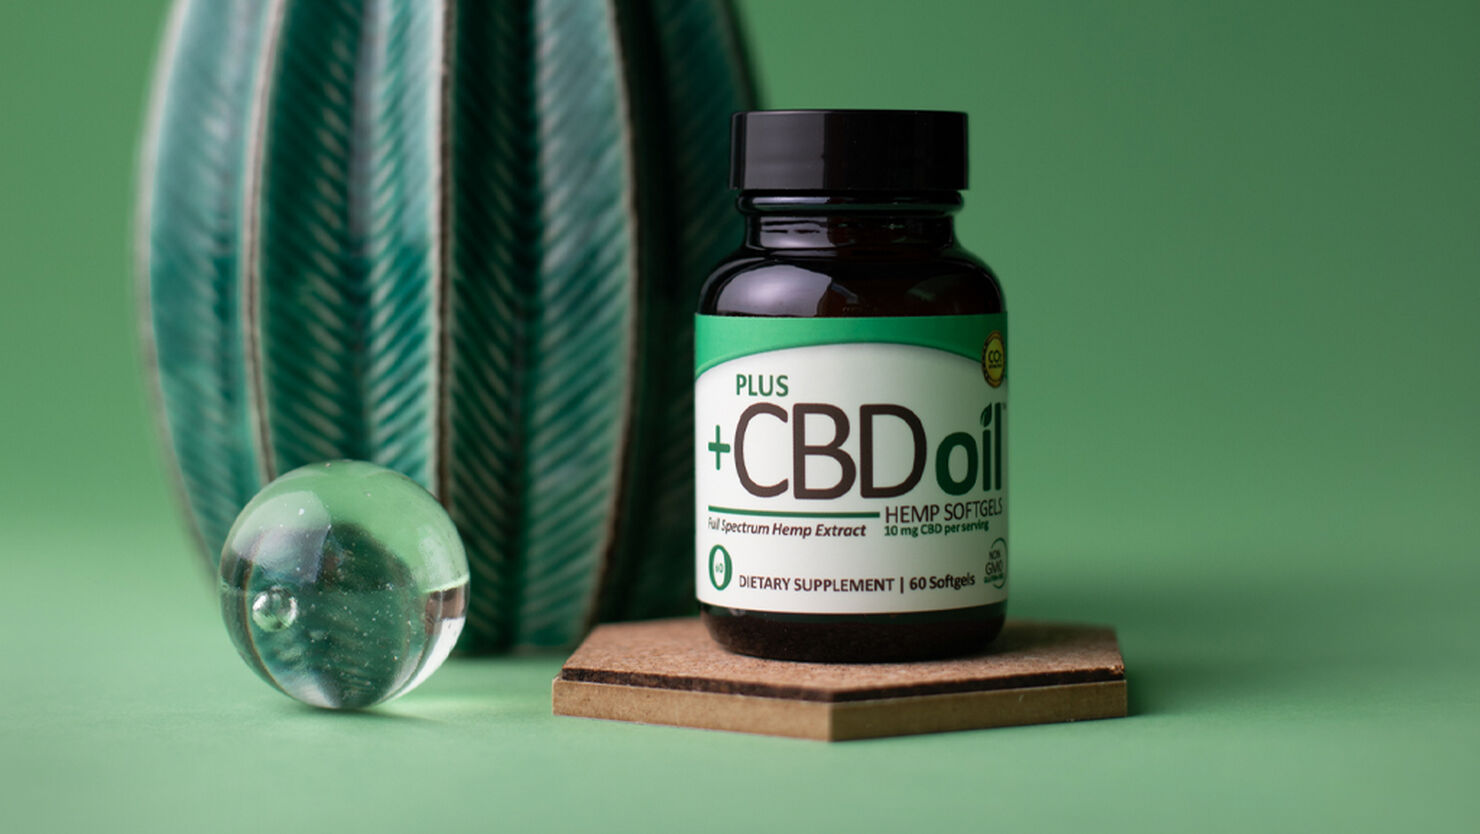 PlusCBD Tips: What to Look For in a CBD Product